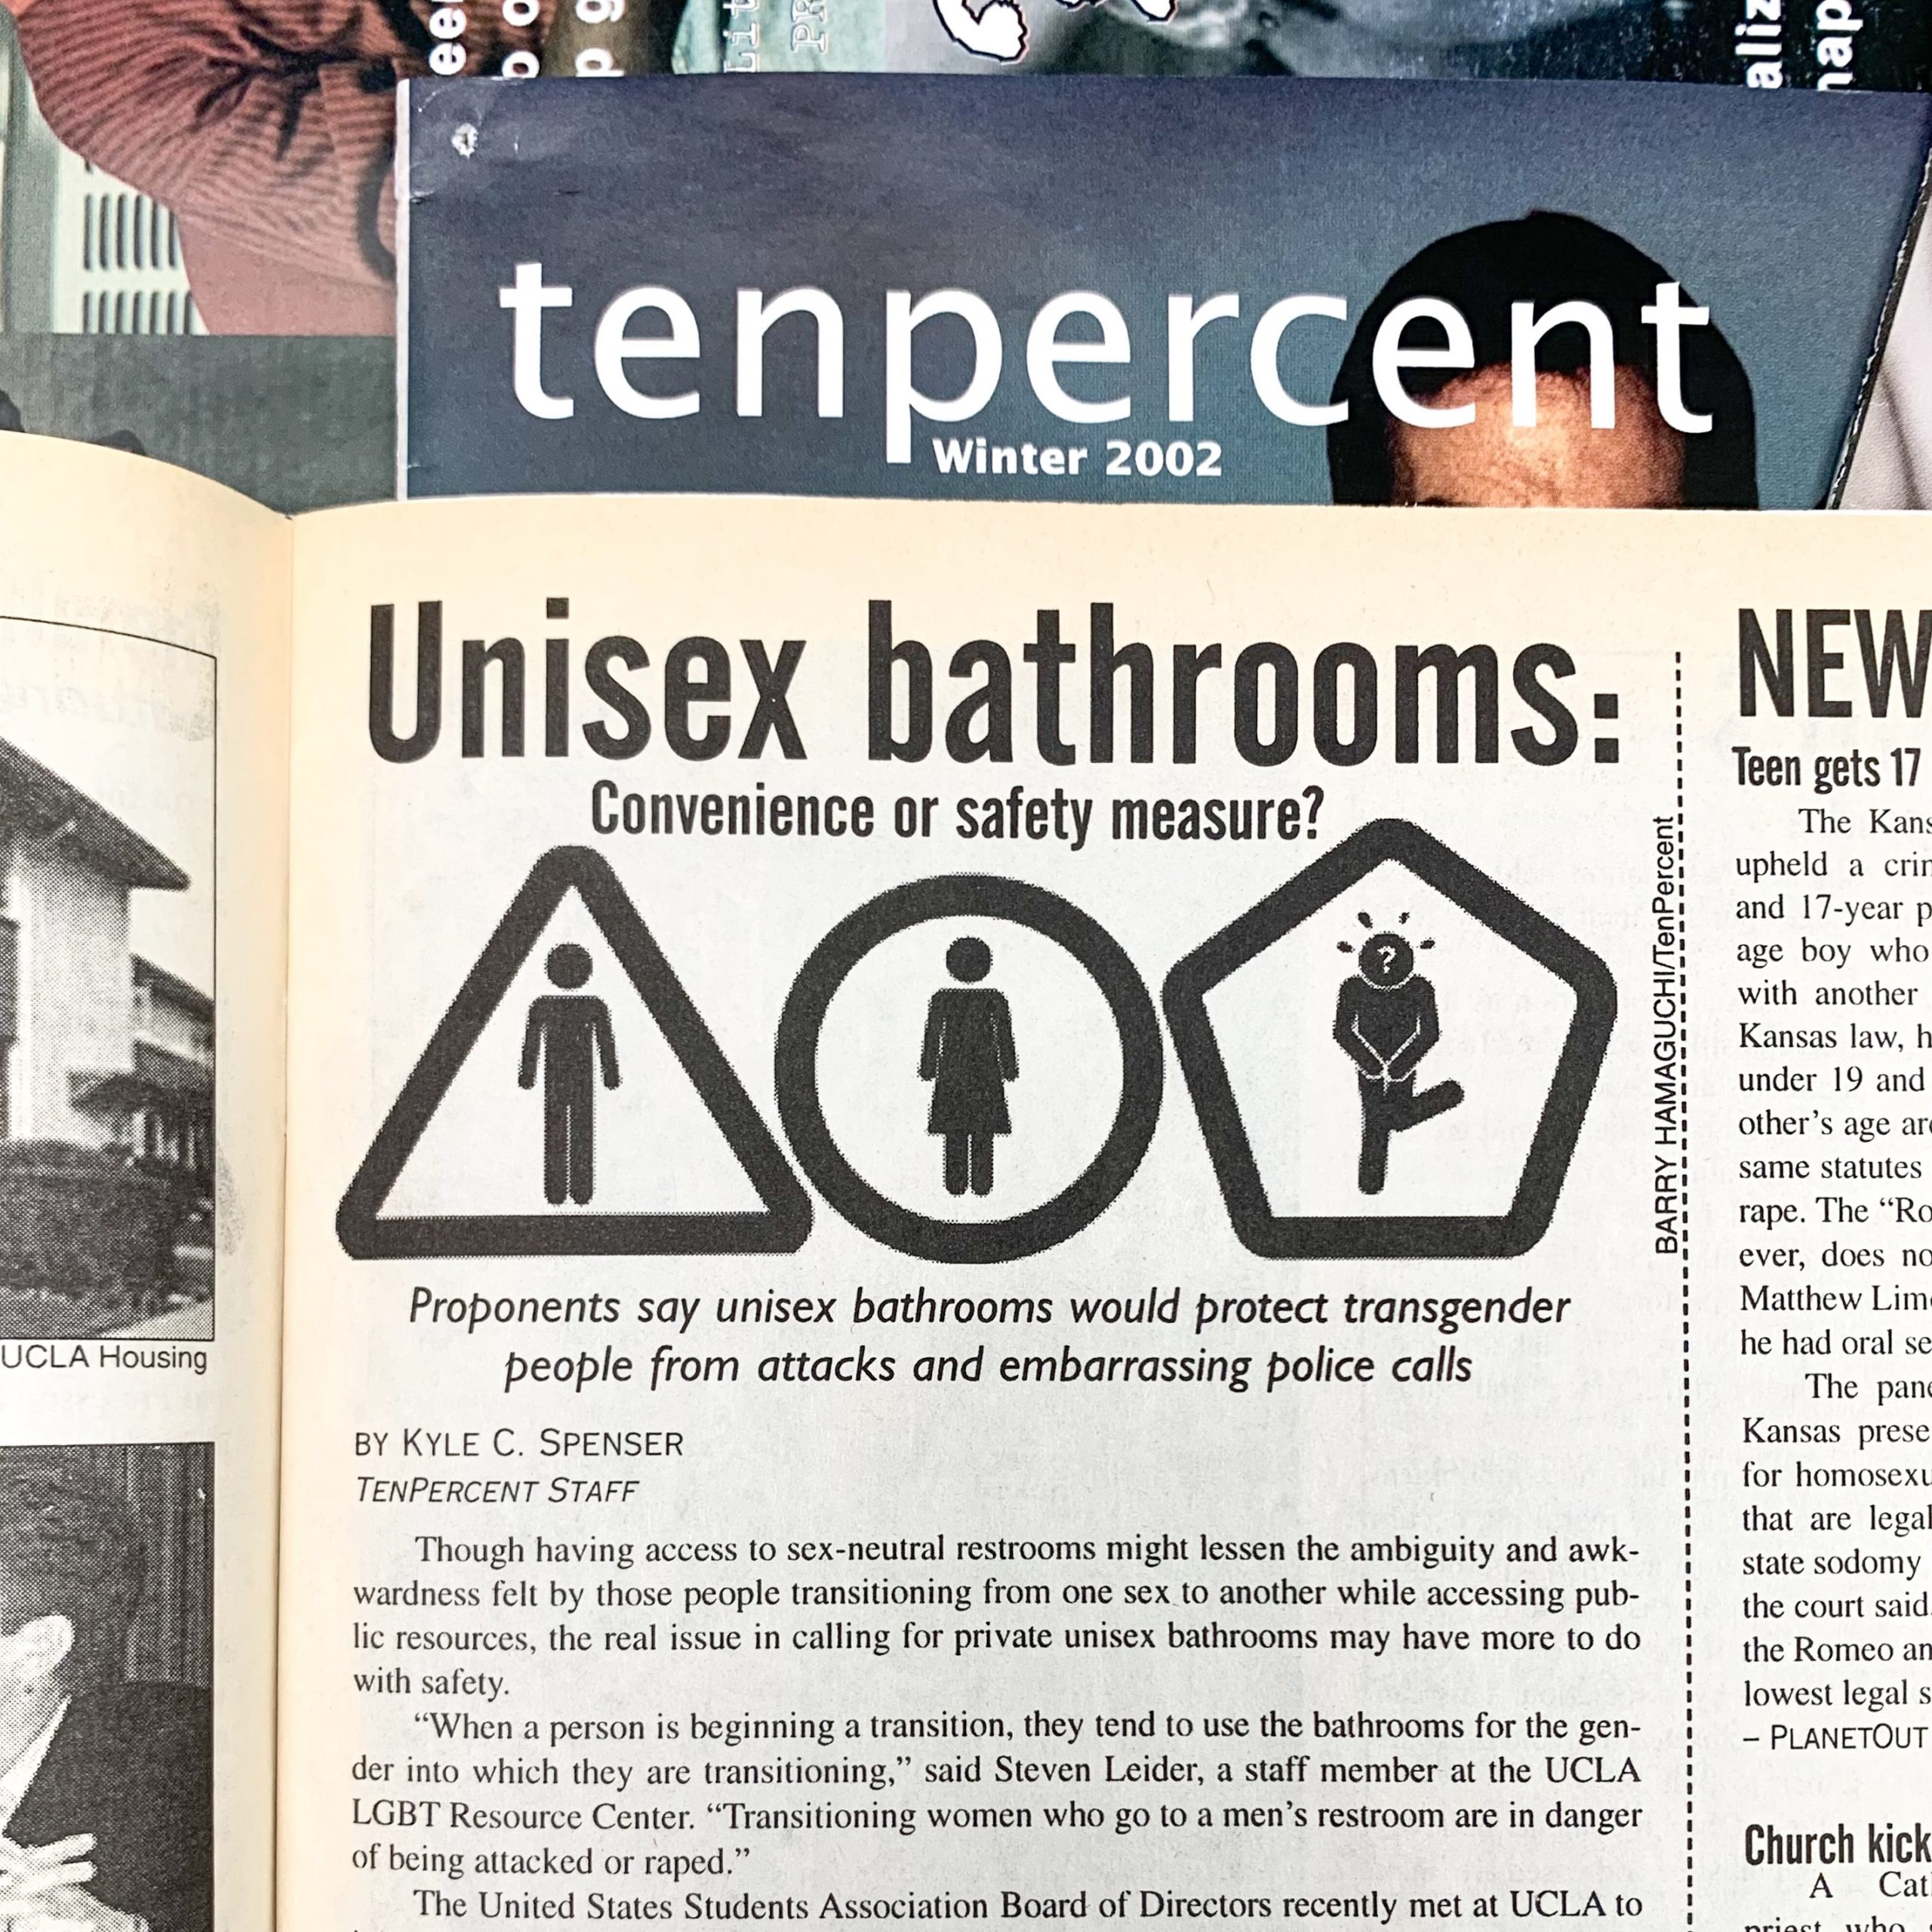 ten percent print article titled unisex bathrooms: convenience or safety measure? below title are bathroom signs